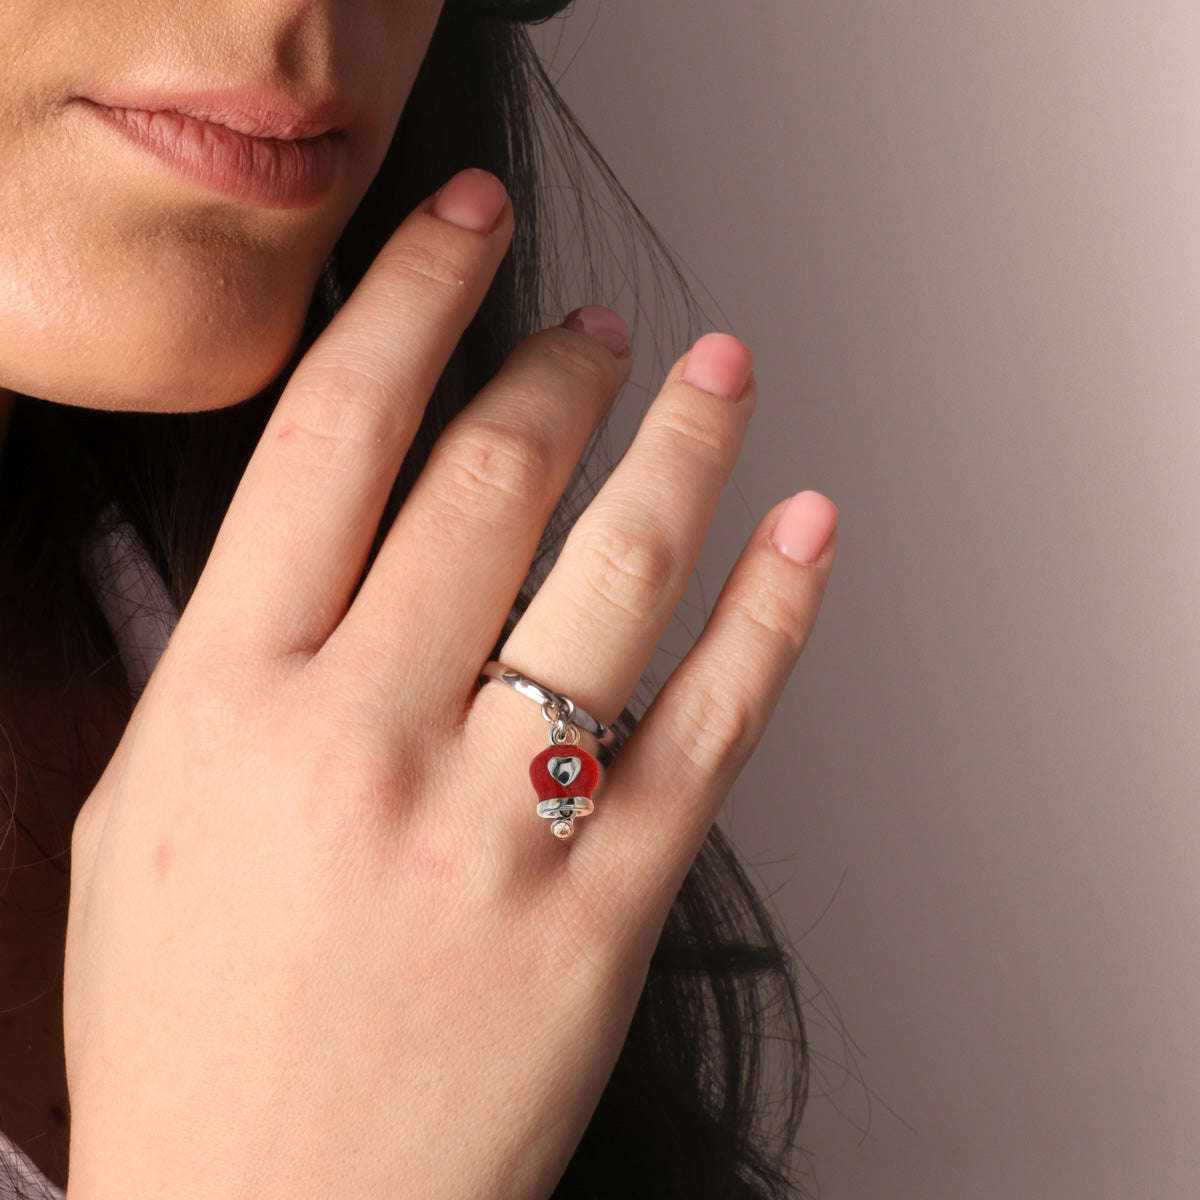 Metal ring with red lucky charm and heart, embellished with white crystals